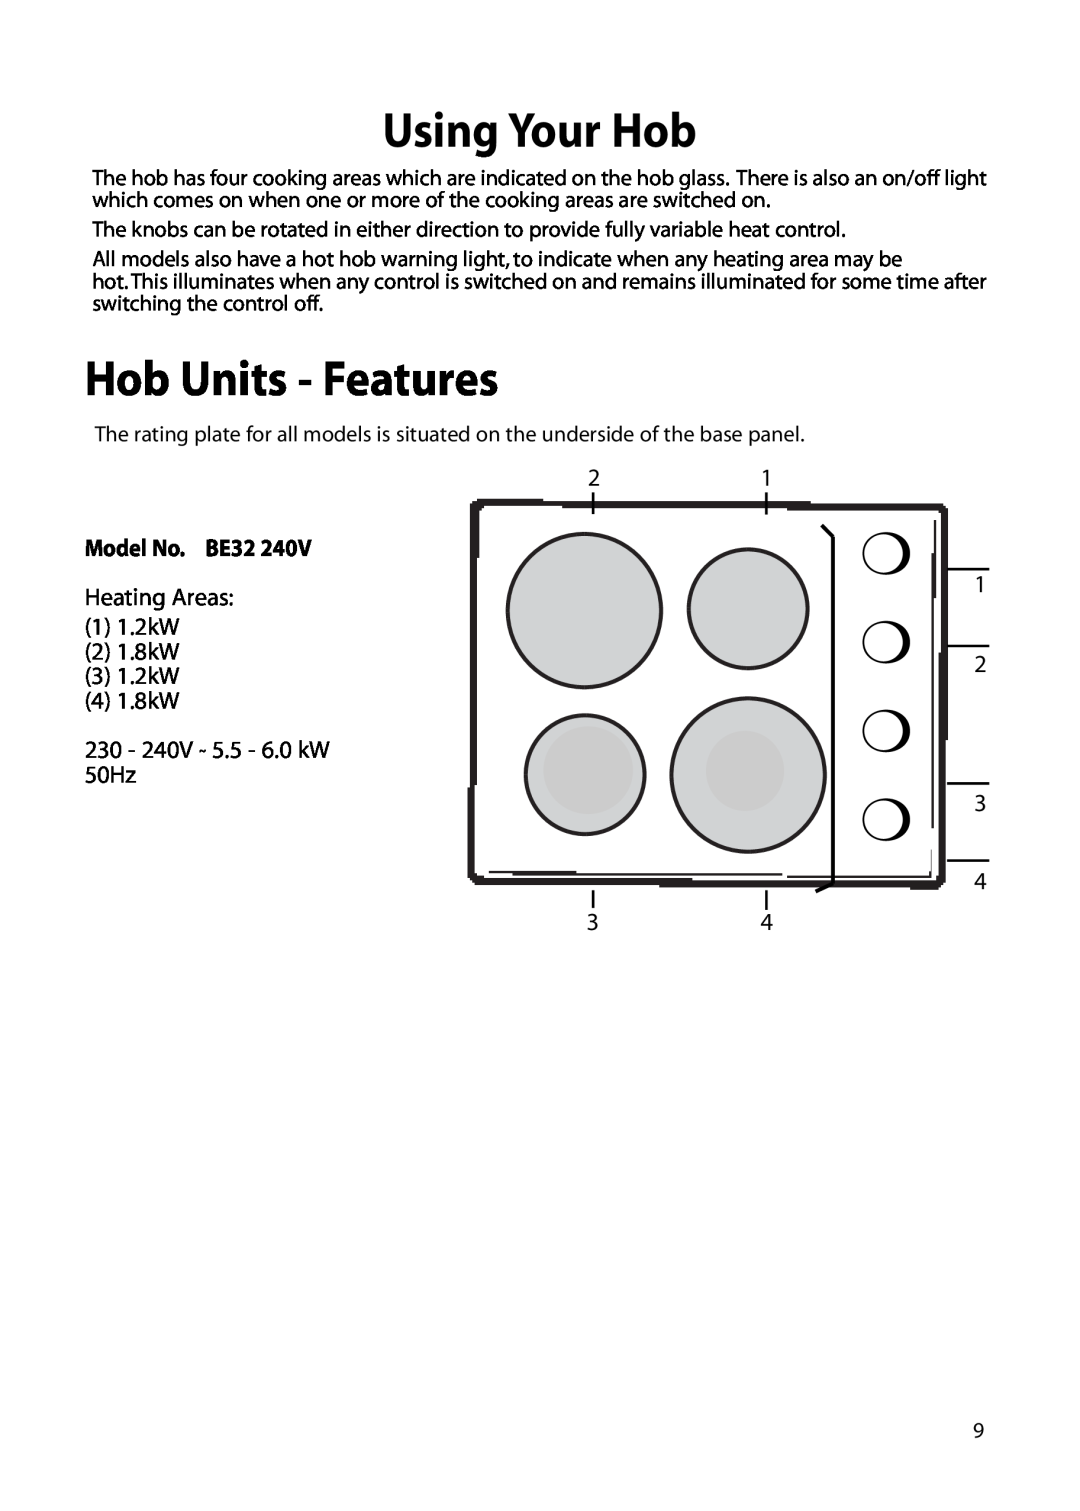 Hotpoint BE32 manual Using Your Hob, Hob Units - Features 